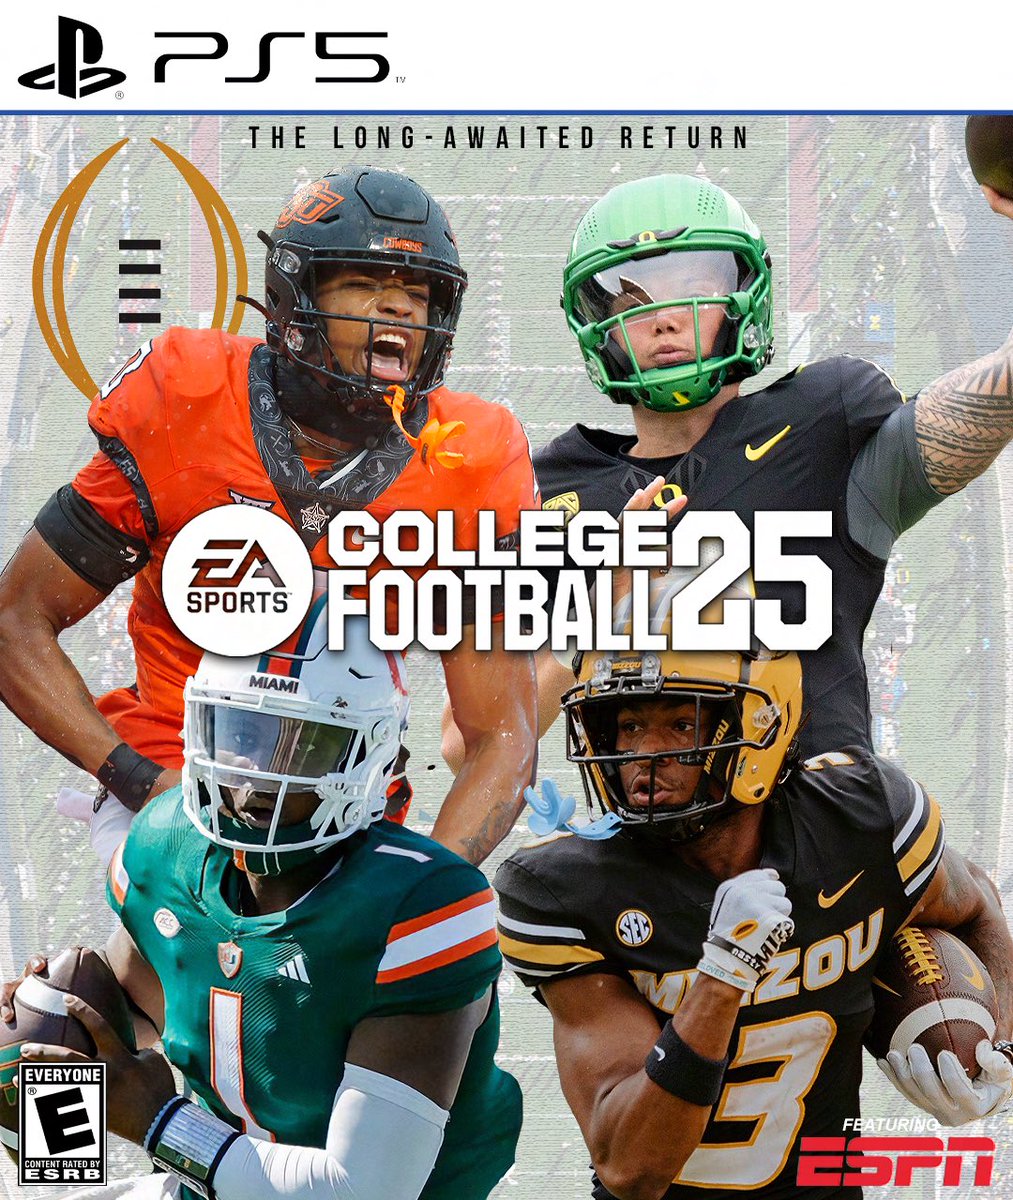 Multiple cover athletes you say? #CFB25